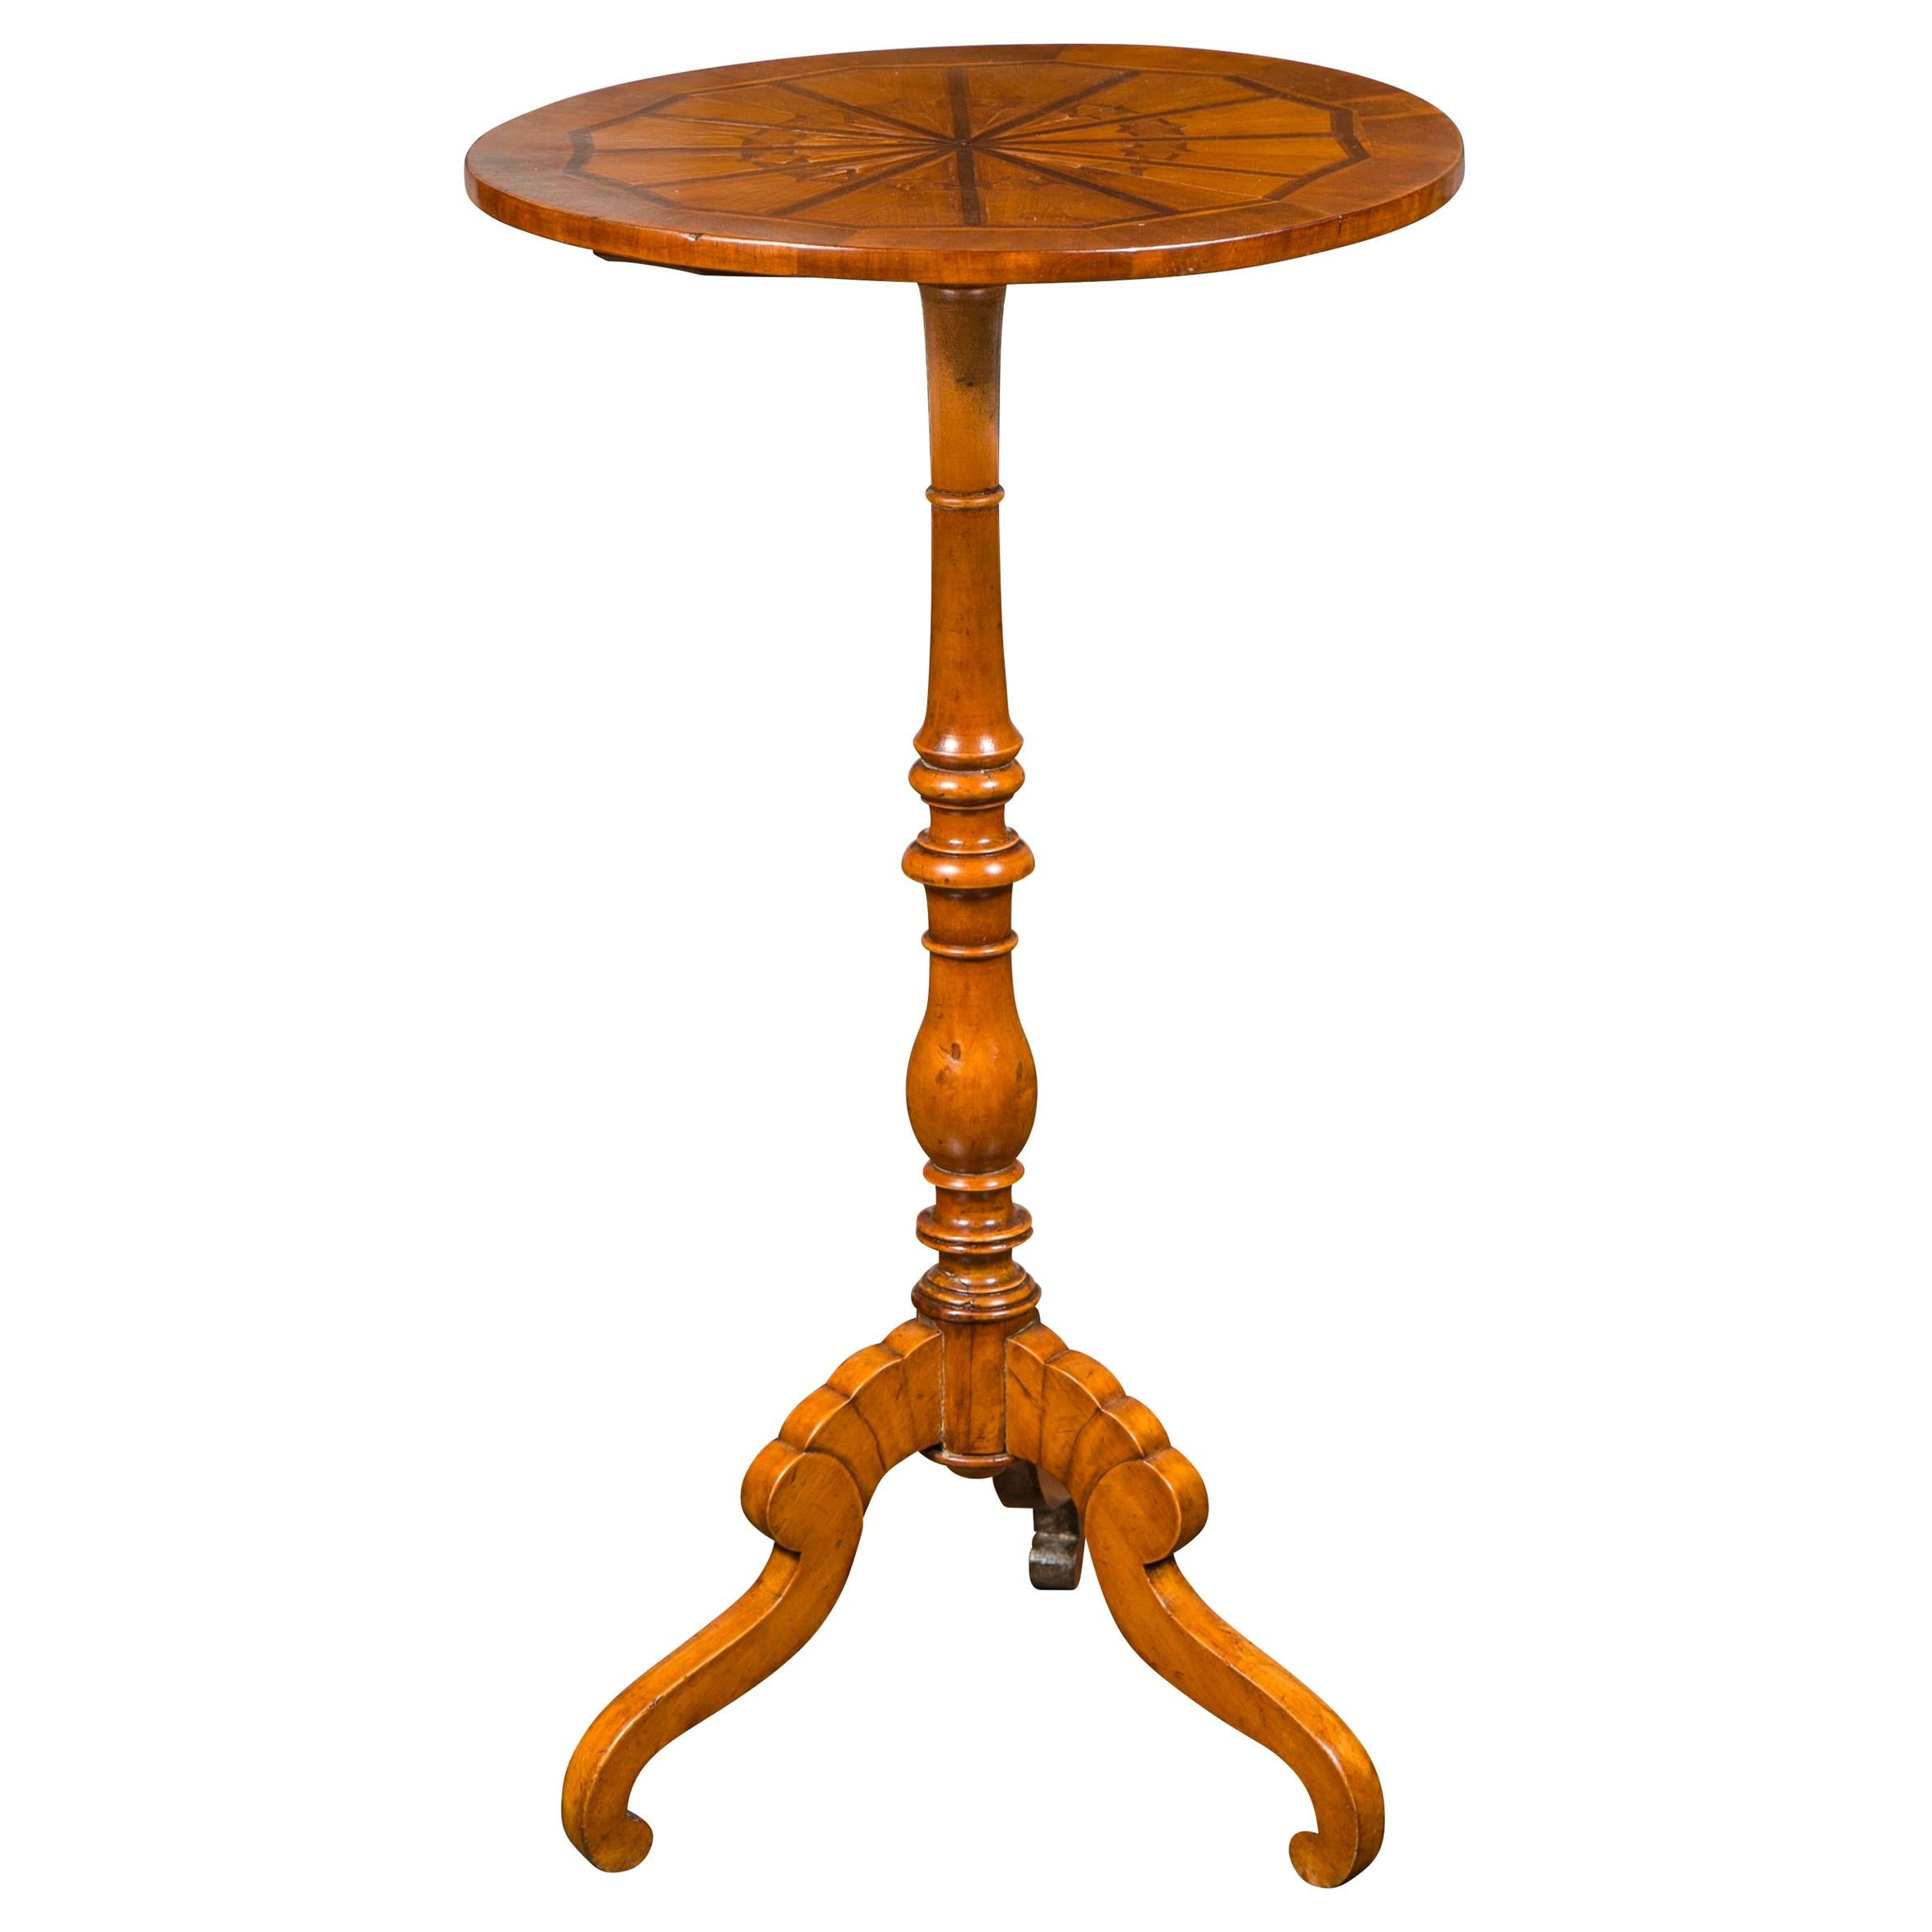 Italian 1850s Walnut Guéridon Table with Star Marquetry and Tripod Pedestal Base